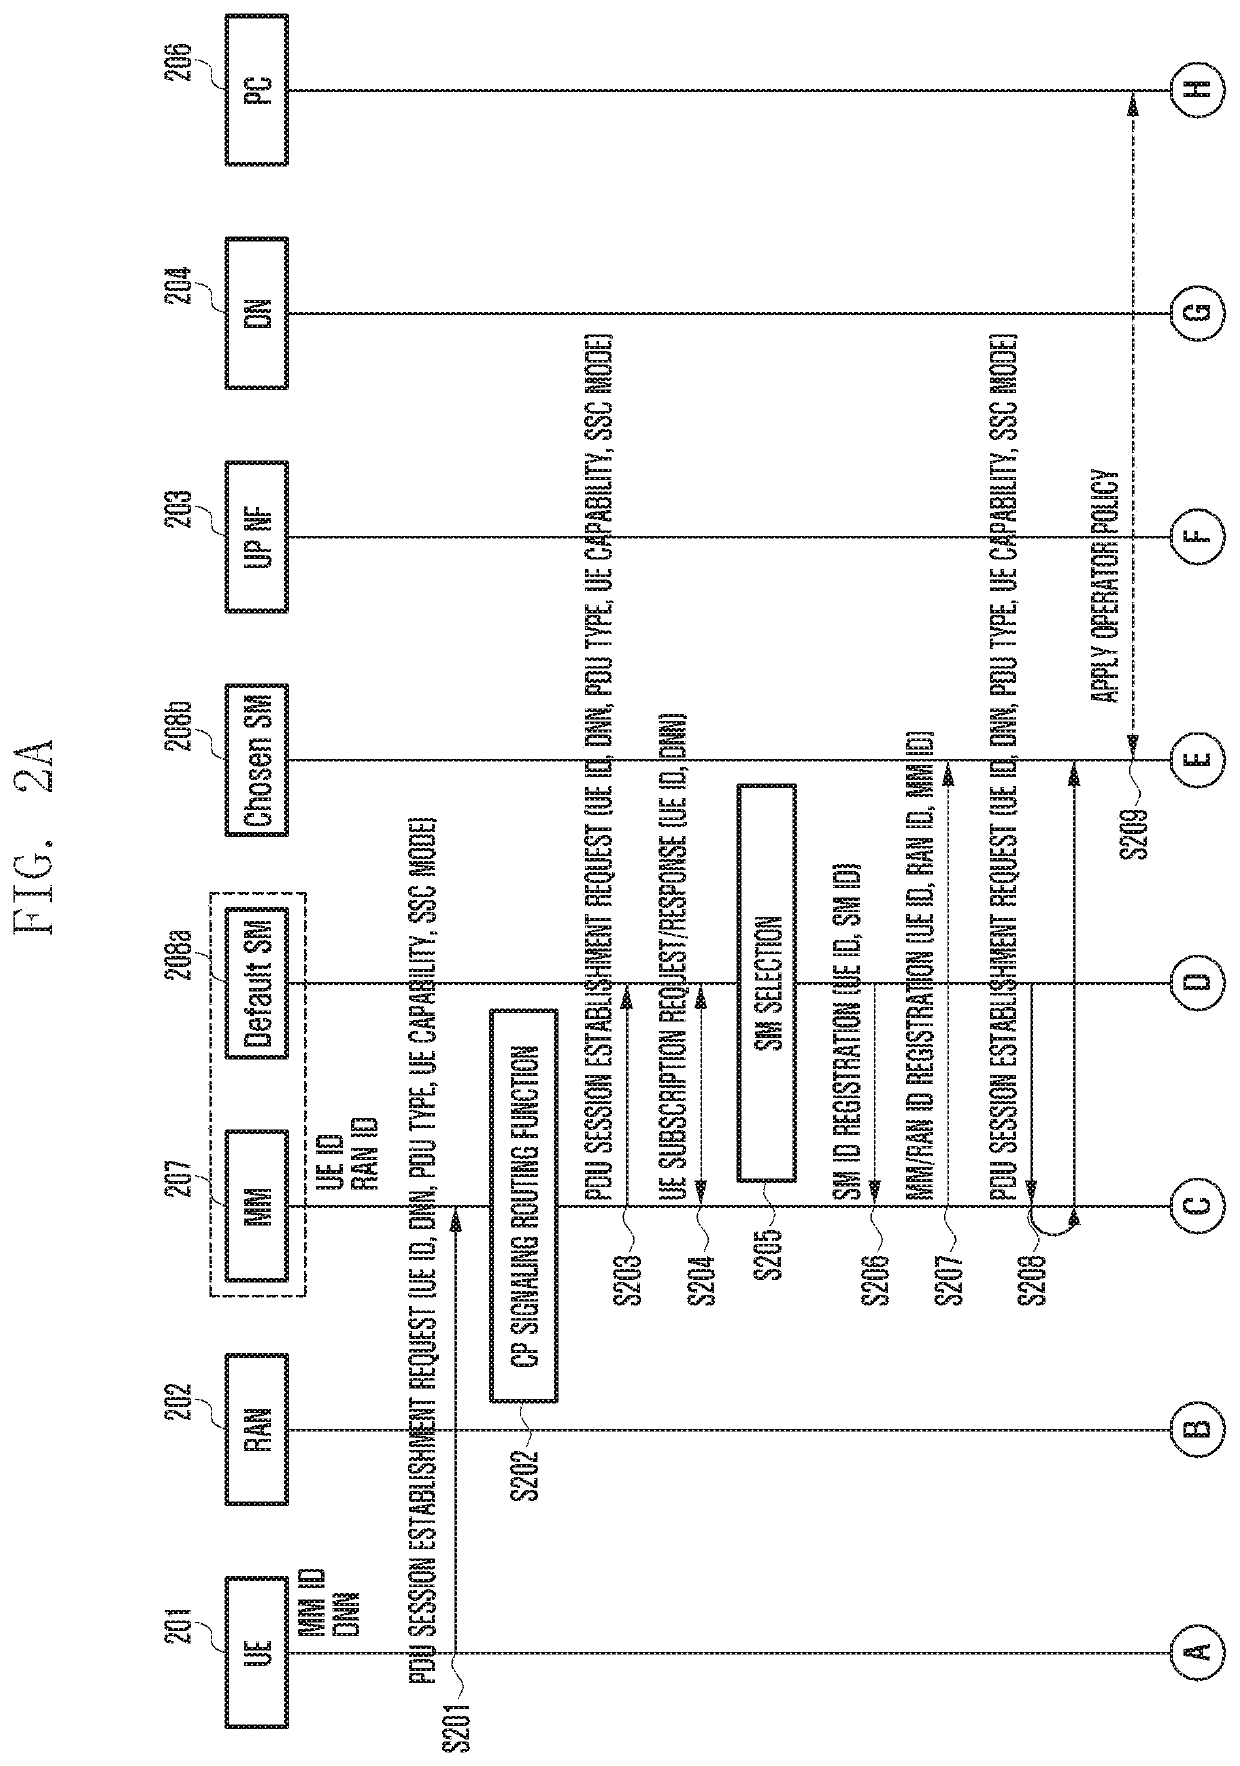 Method and apparatus for operating wireless communication system having separated mobility management and session management